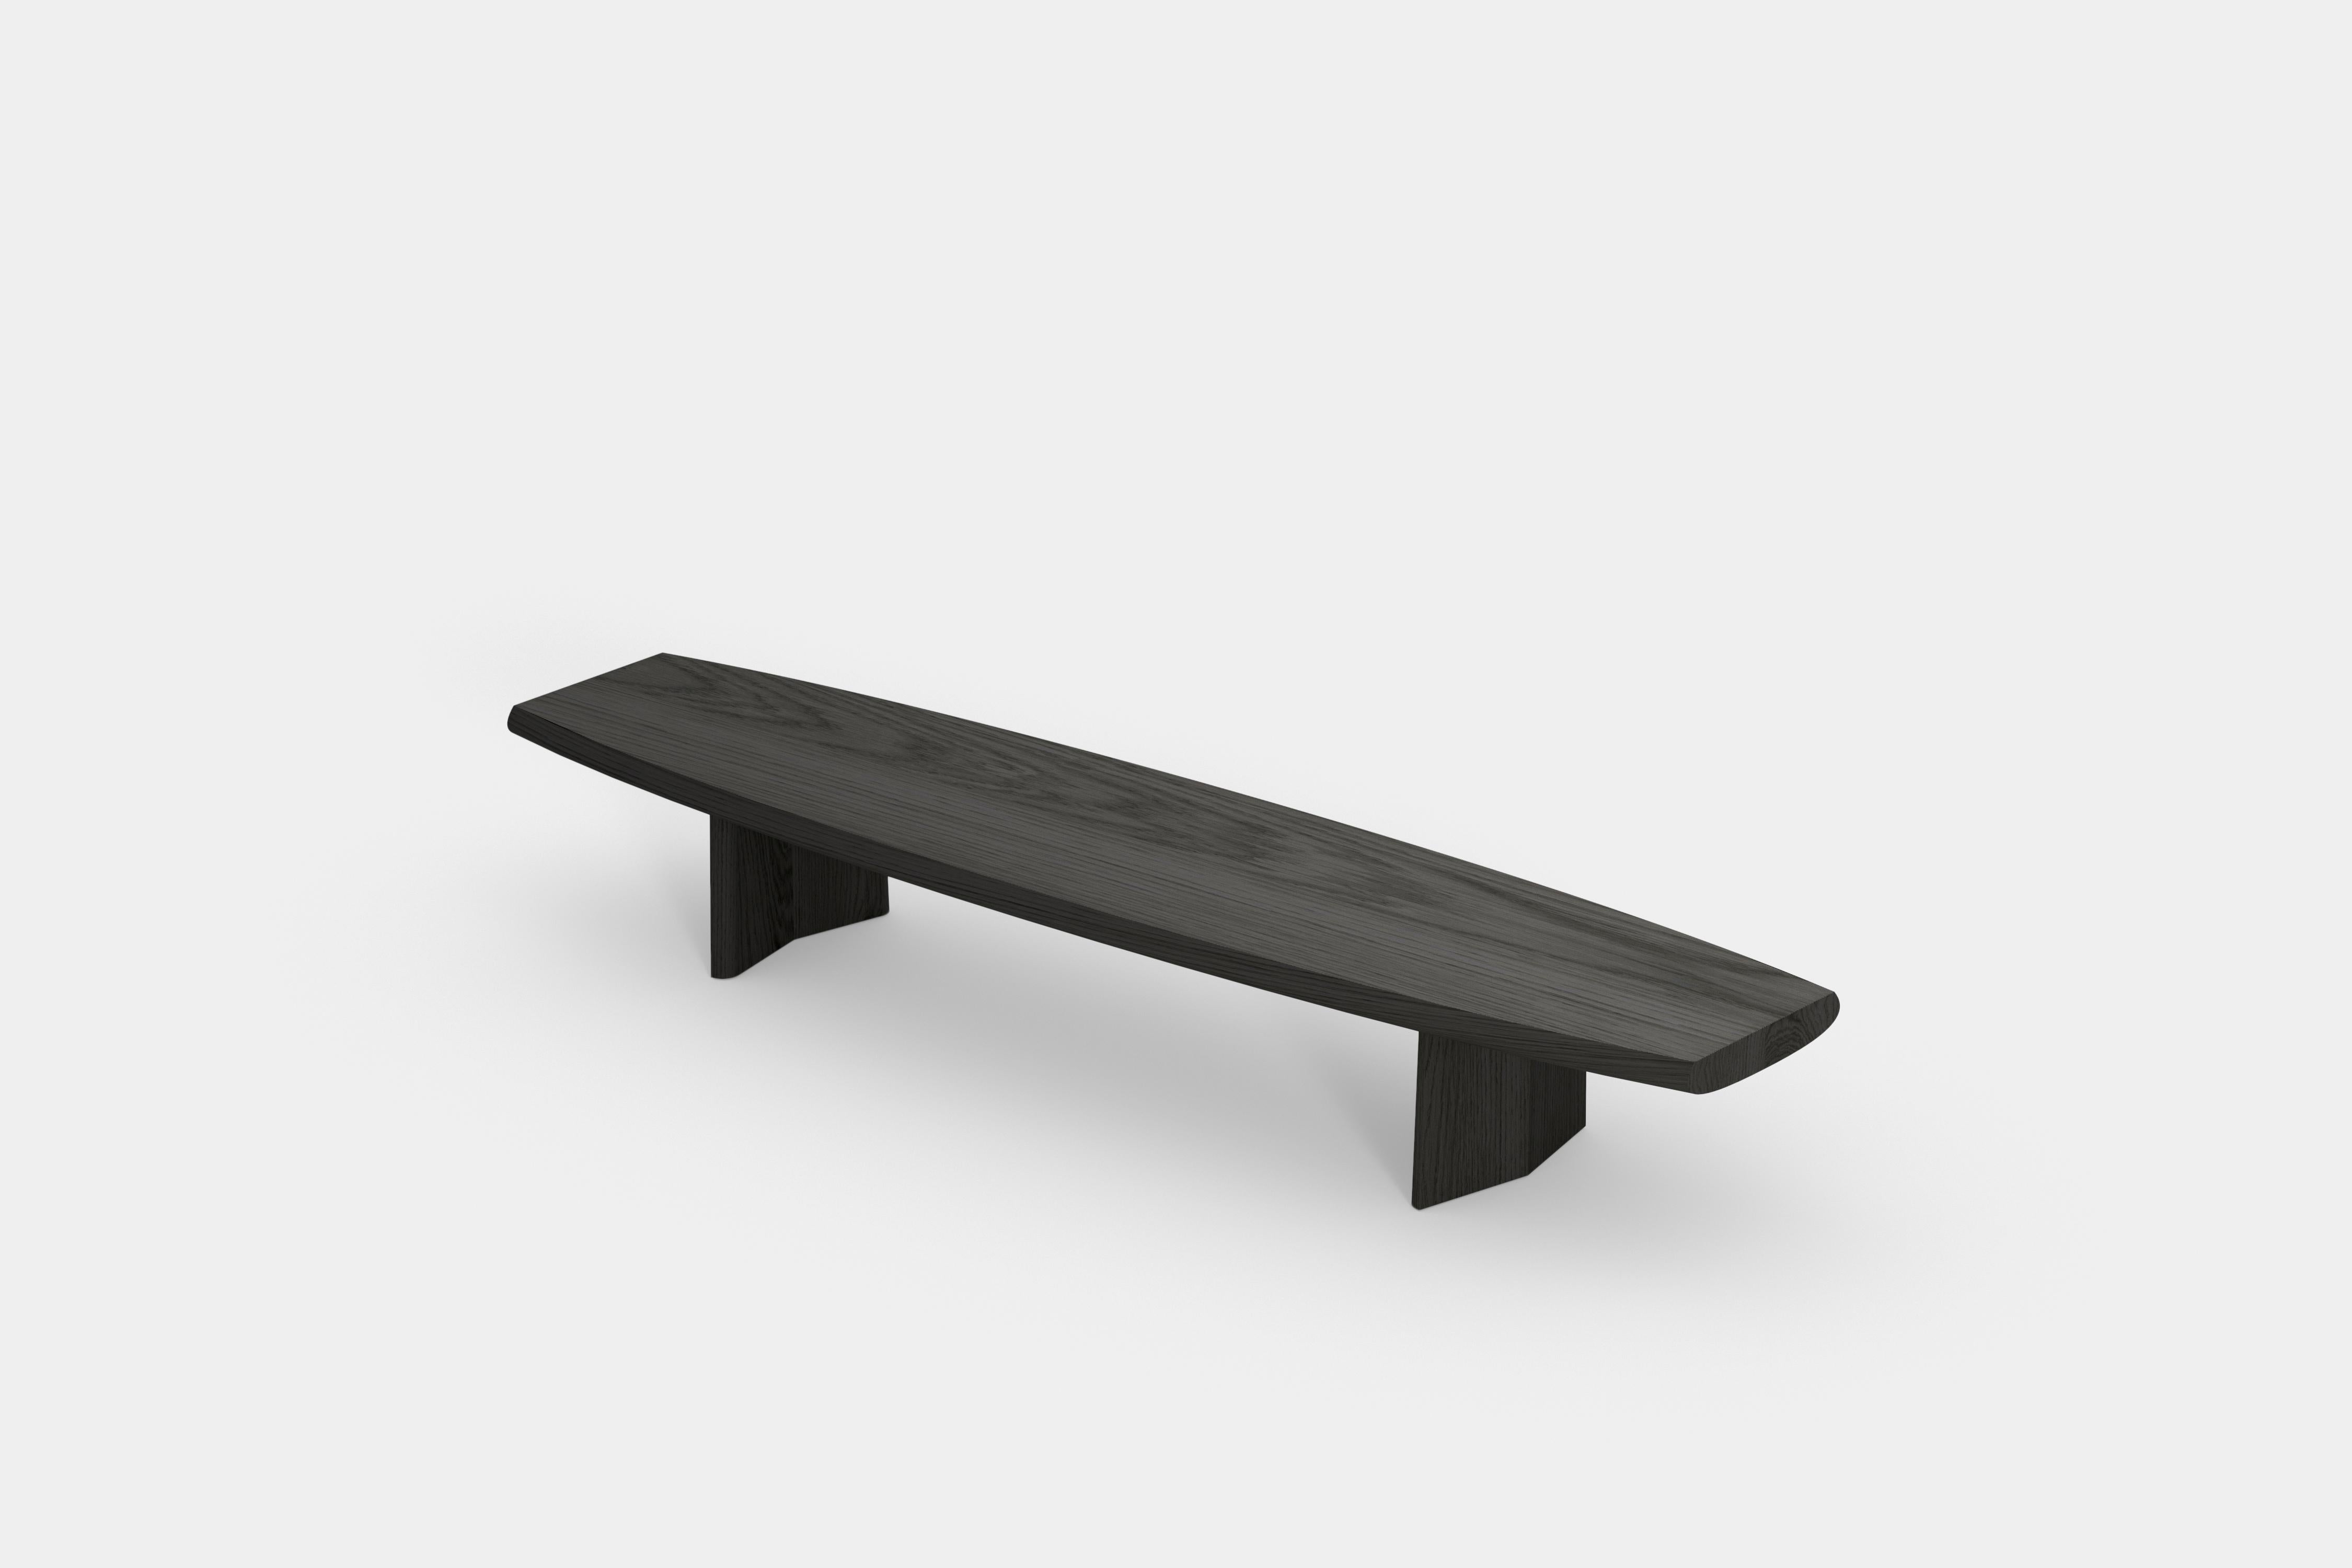 Oak Set of 2 Peana Coffee Tables, Bench in Black Tinted Wood Finish by Joel Escalona For Sale